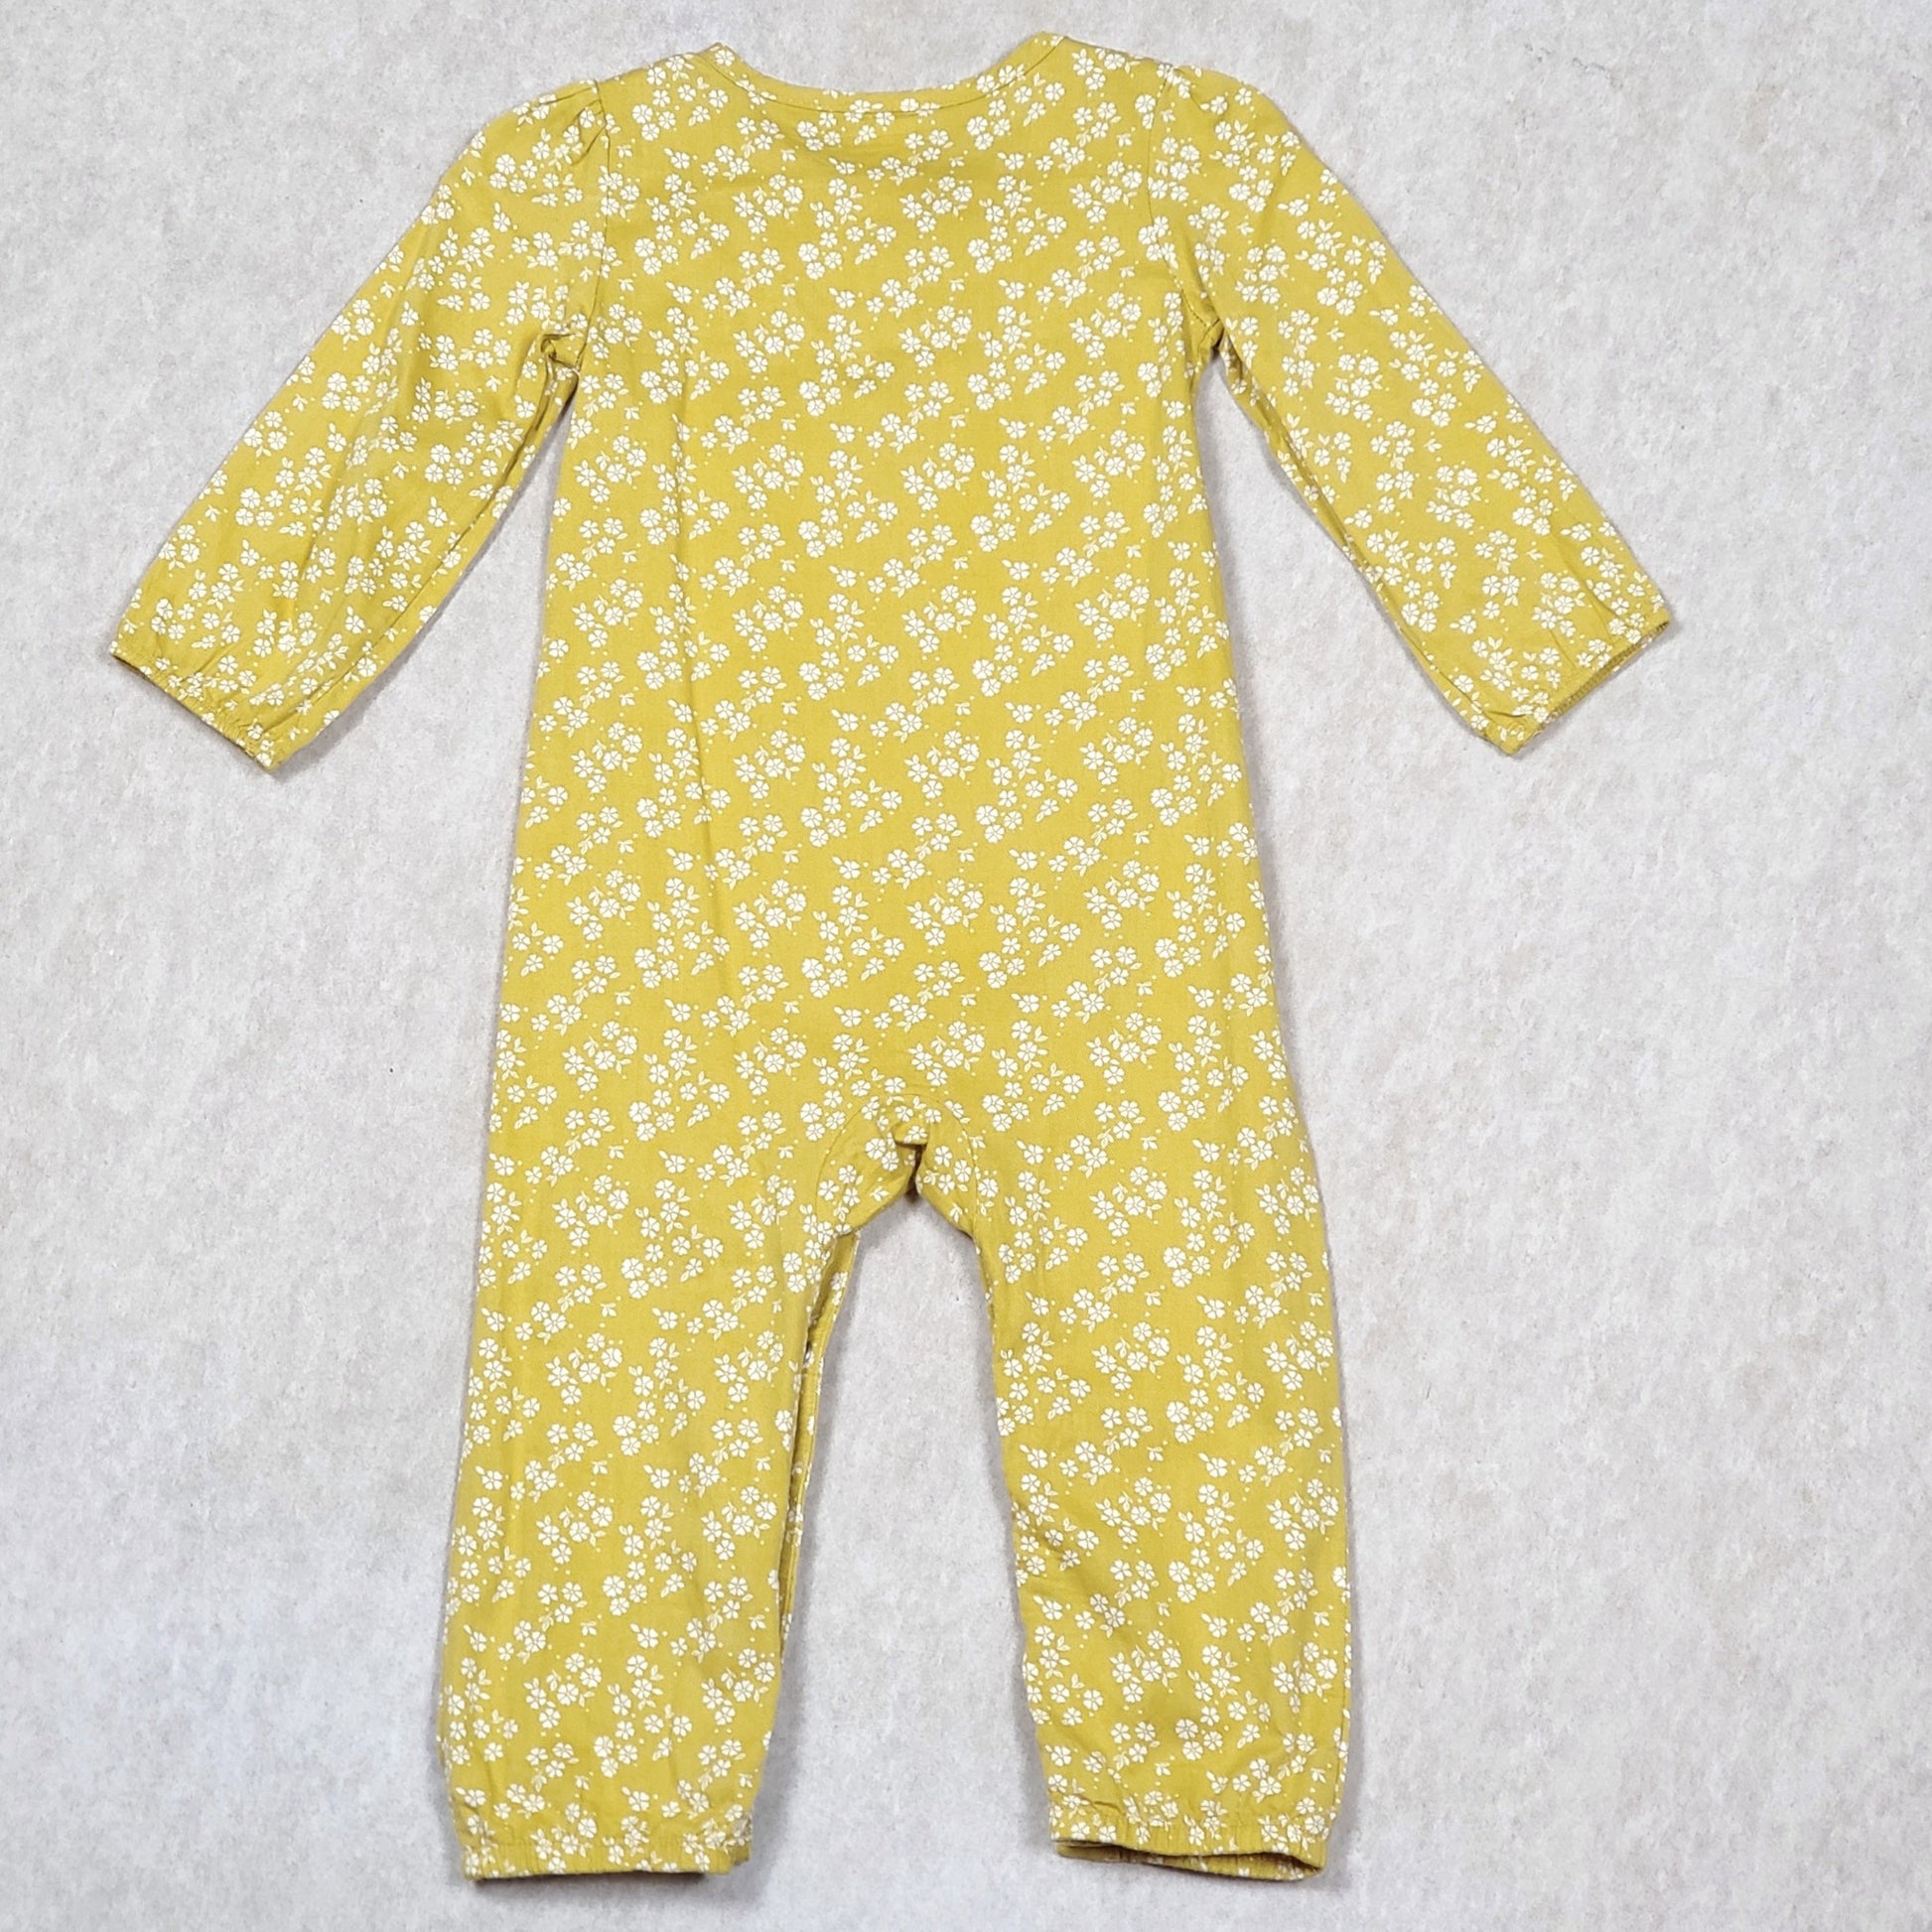 Carters Girls Yellow White Floral Jumpsuit 18M Used View 2